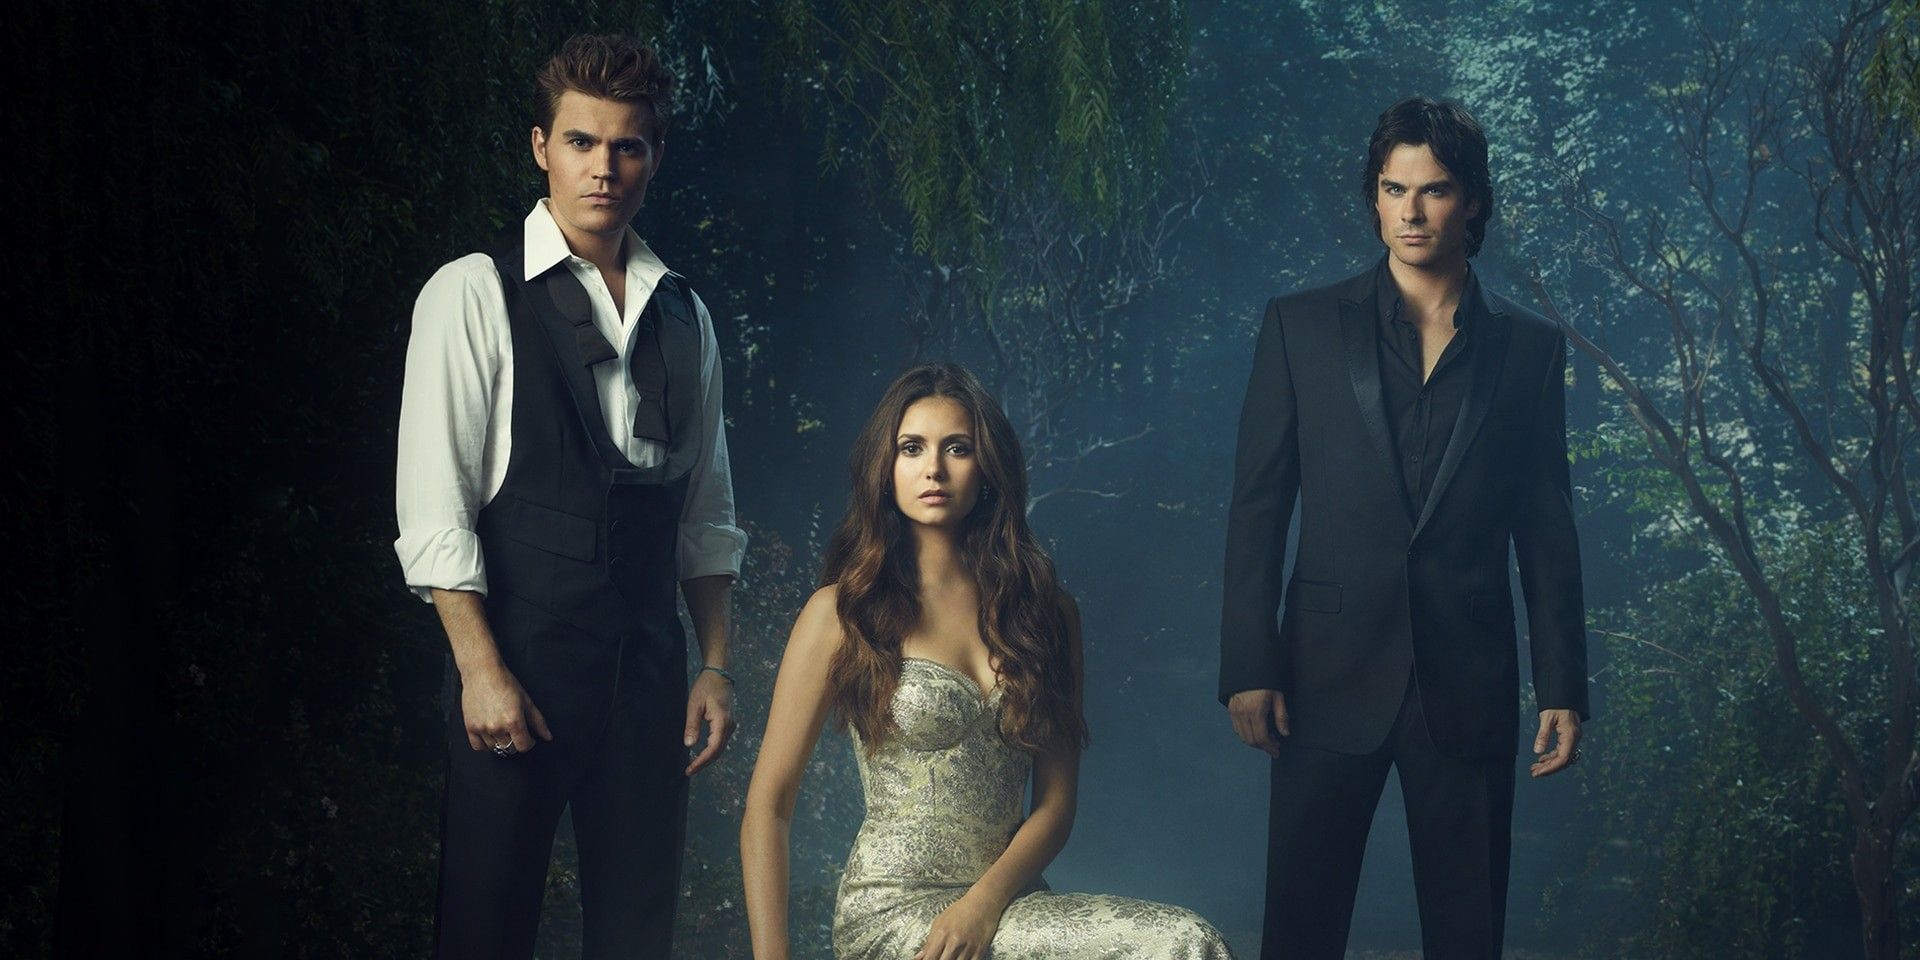 Stefan, Elena and Damon standing in a forest looking pensive